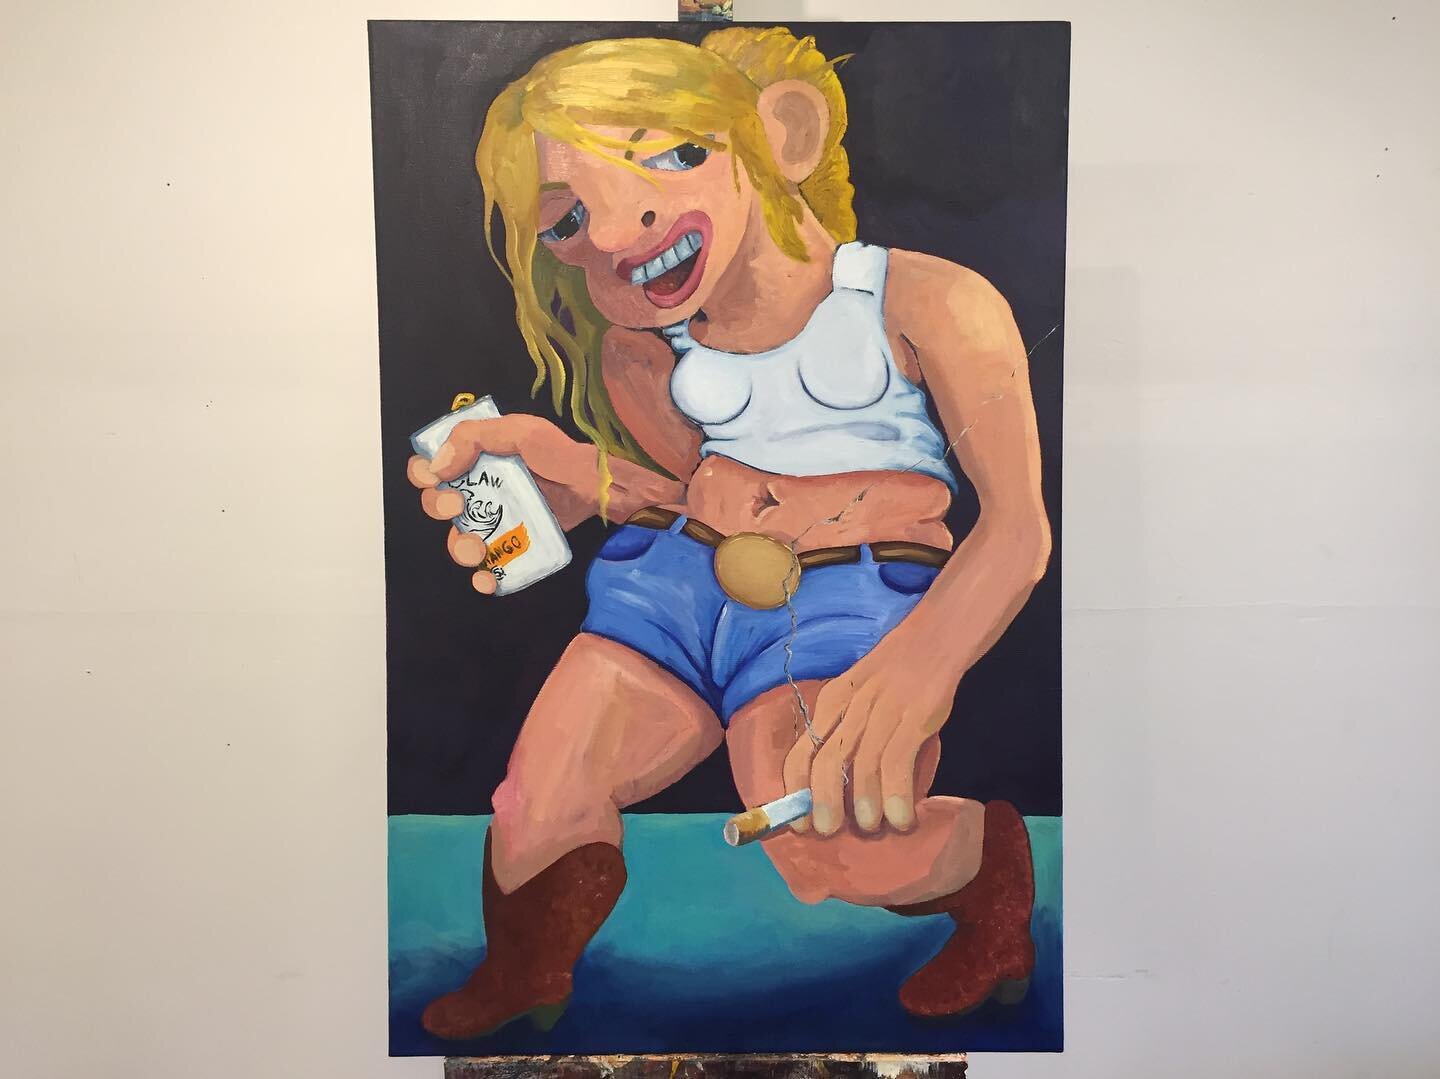 Hello 👋 
I&rsquo;ve been busy working on my tan...so enjoy this painting 

&ldquo;Daisy Dukes&rdquo;
2022
36&rsquo;x24&rsquo;
Oil on canvas

#painting #oilpainting #figurativepainting #figurativeart #cartoonart #contemporarypainting #contemporaryart